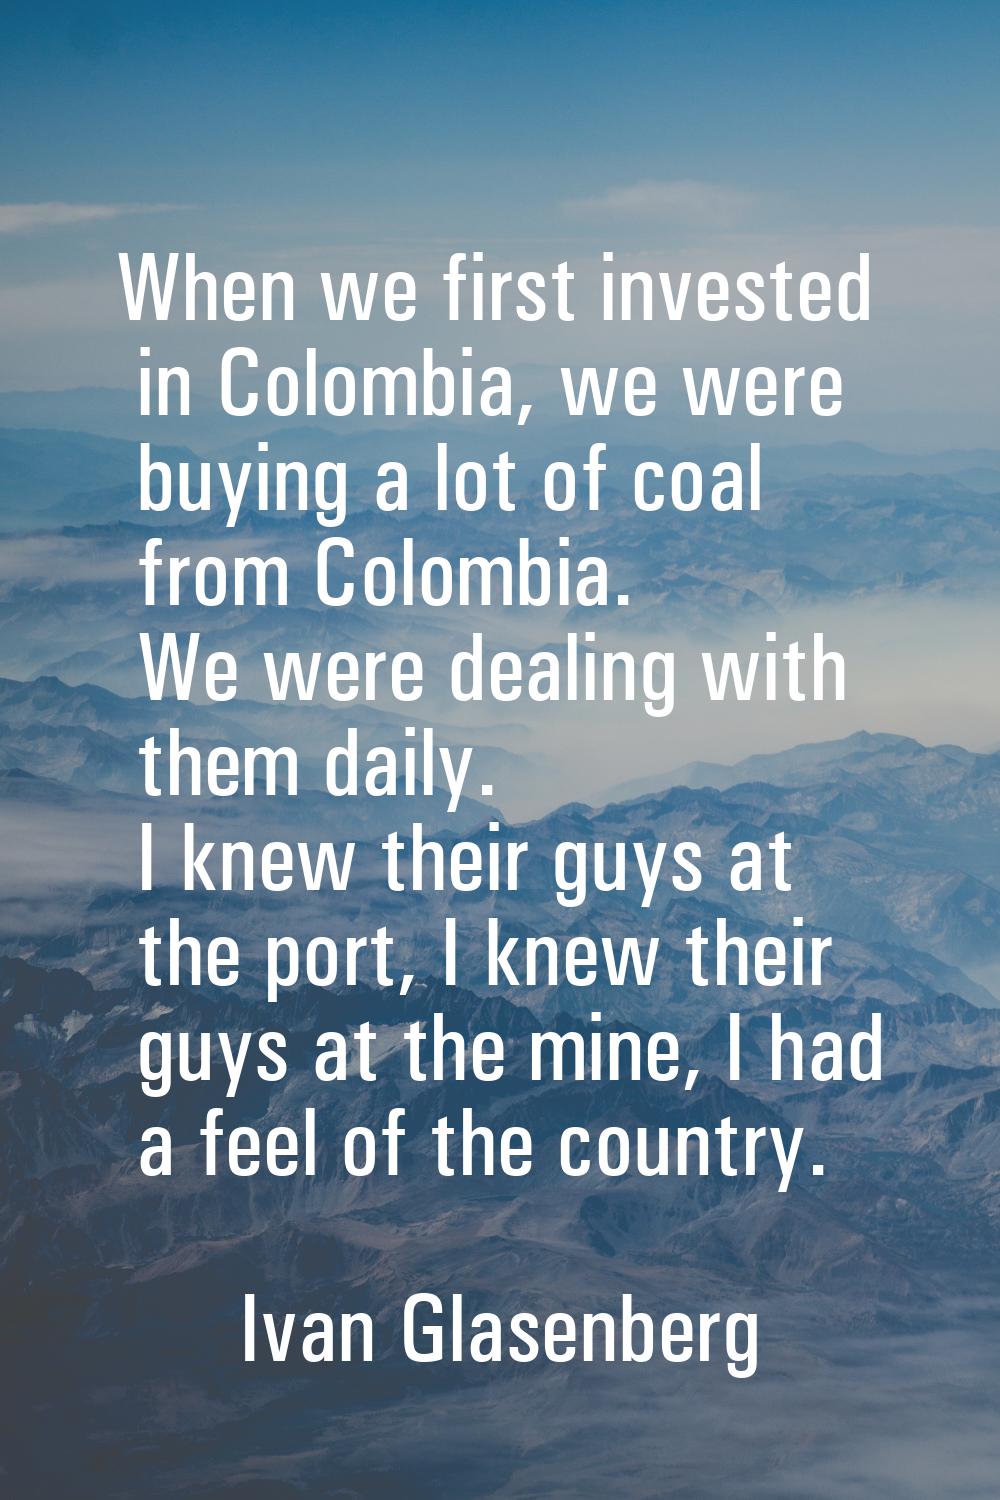 When we first invested in Colombia, we were buying a lot of coal from Colombia. We were dealing wit